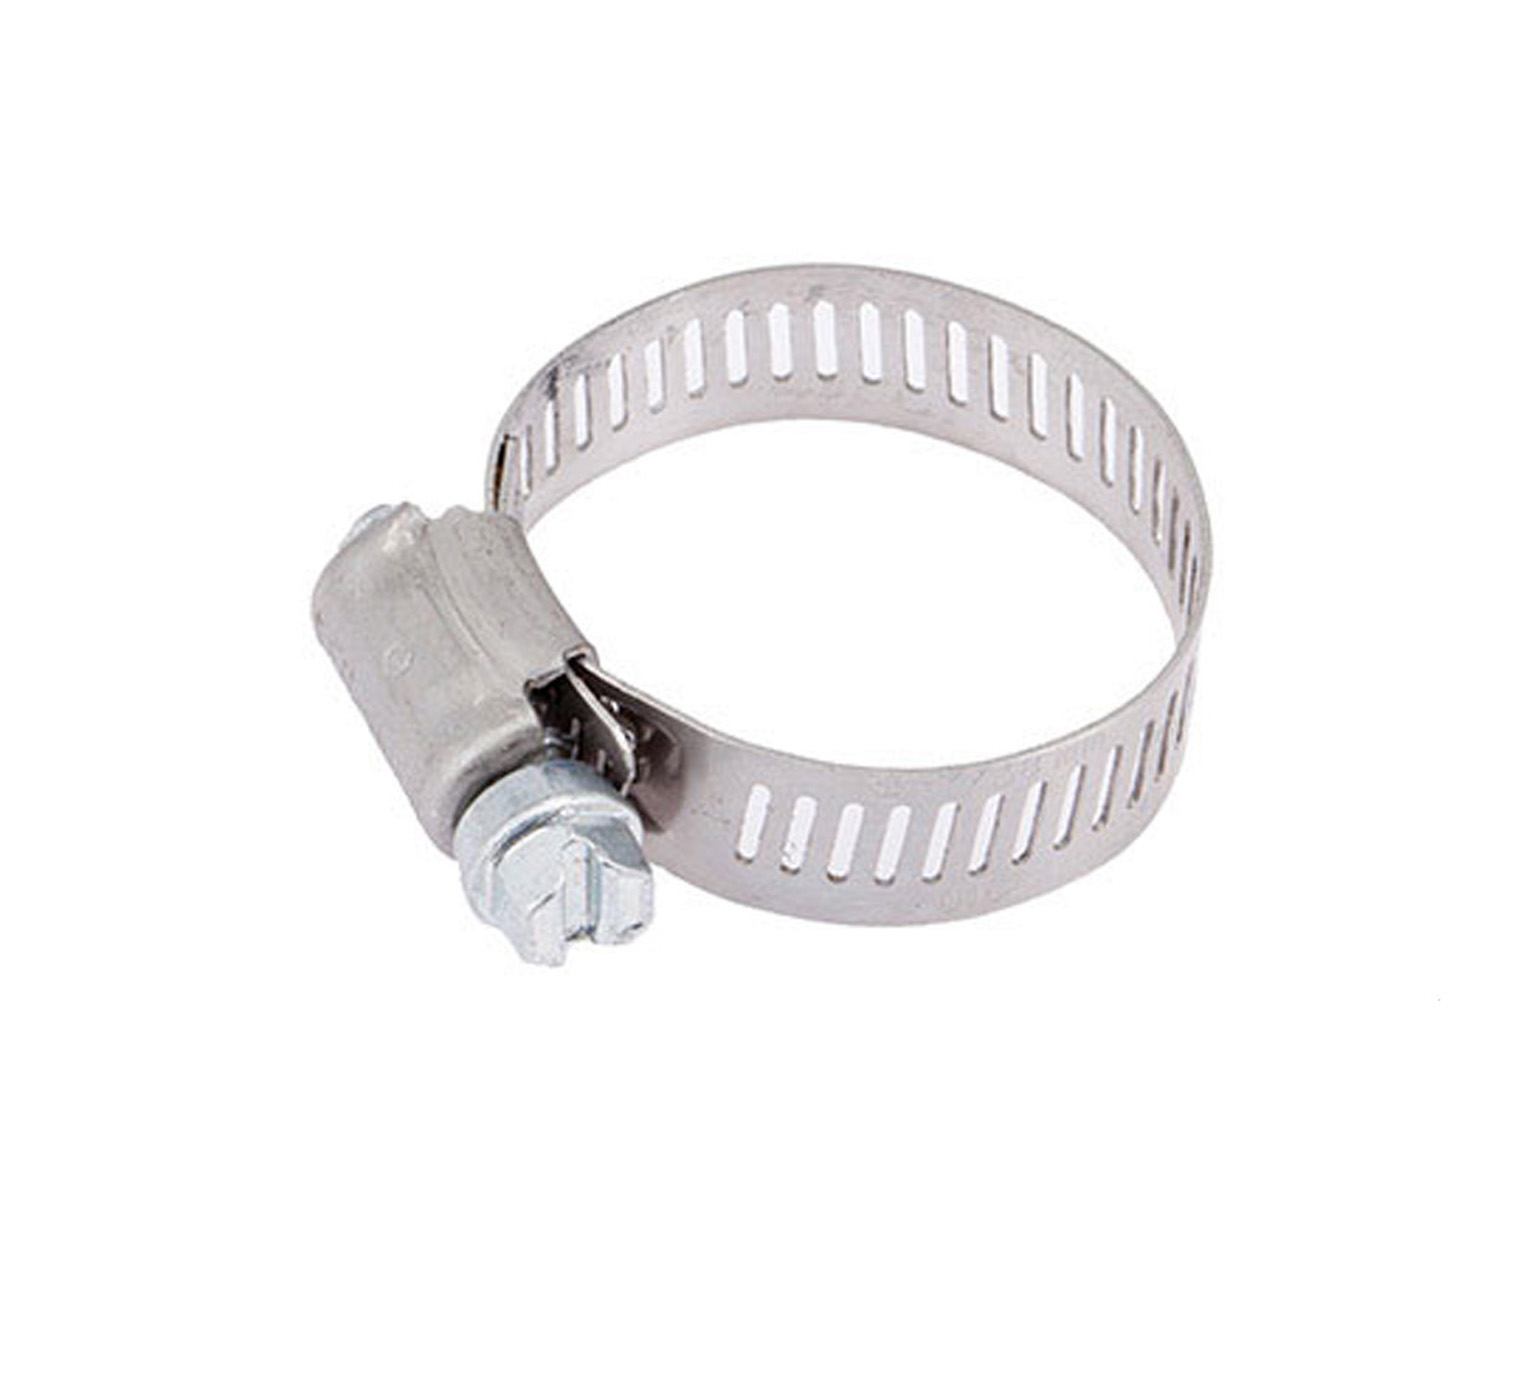 11399 Stainless Steel Hose Clamp - 0.75 - 1.5 in D x 0.5 in alt 1